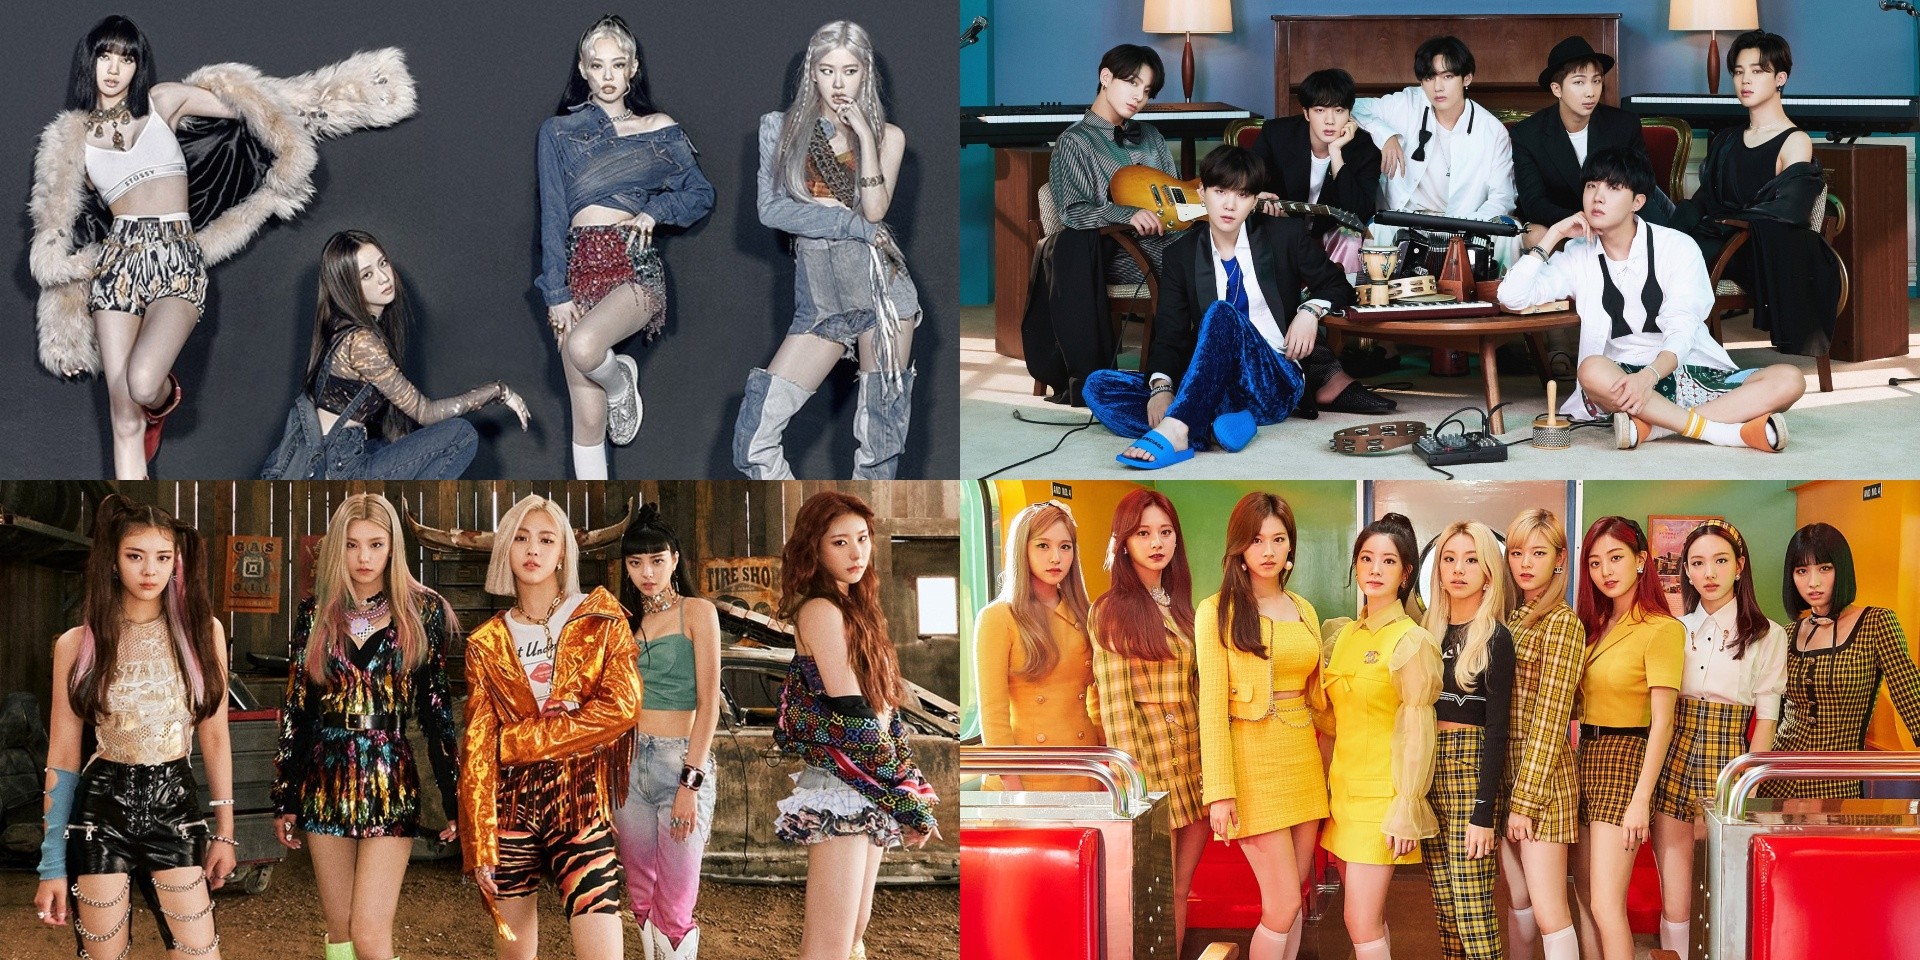 YouTube reveals top videos in Singapore, K-pop dominates music list with BLACKPINK, BTS, ITZY, and TWICE